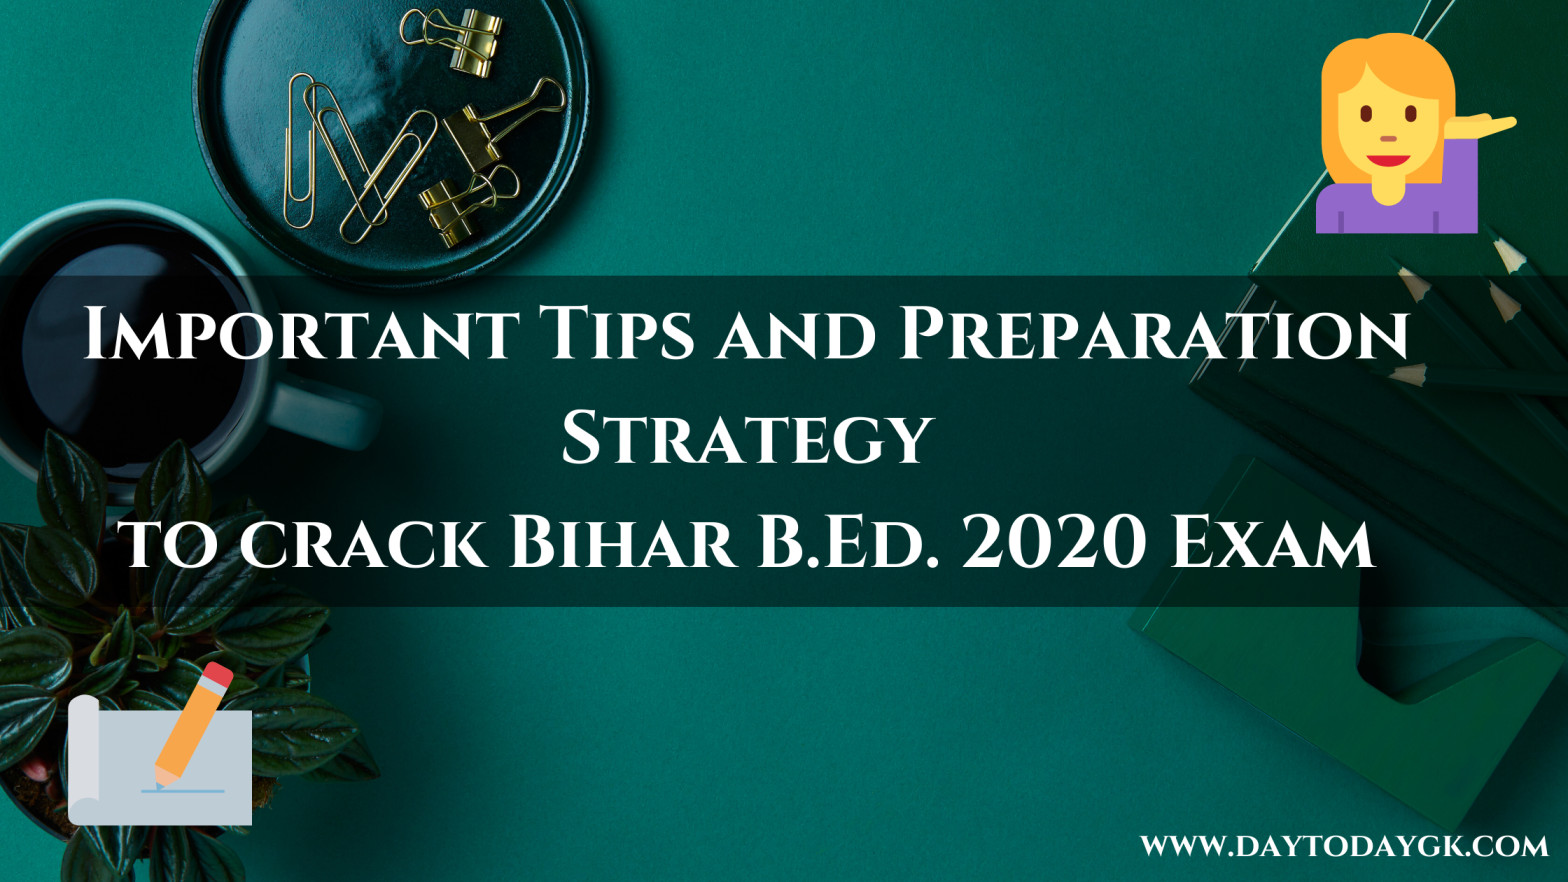 Important Tips and Preparation Strategy to crack Bihar B.Ed. 2020 Exam